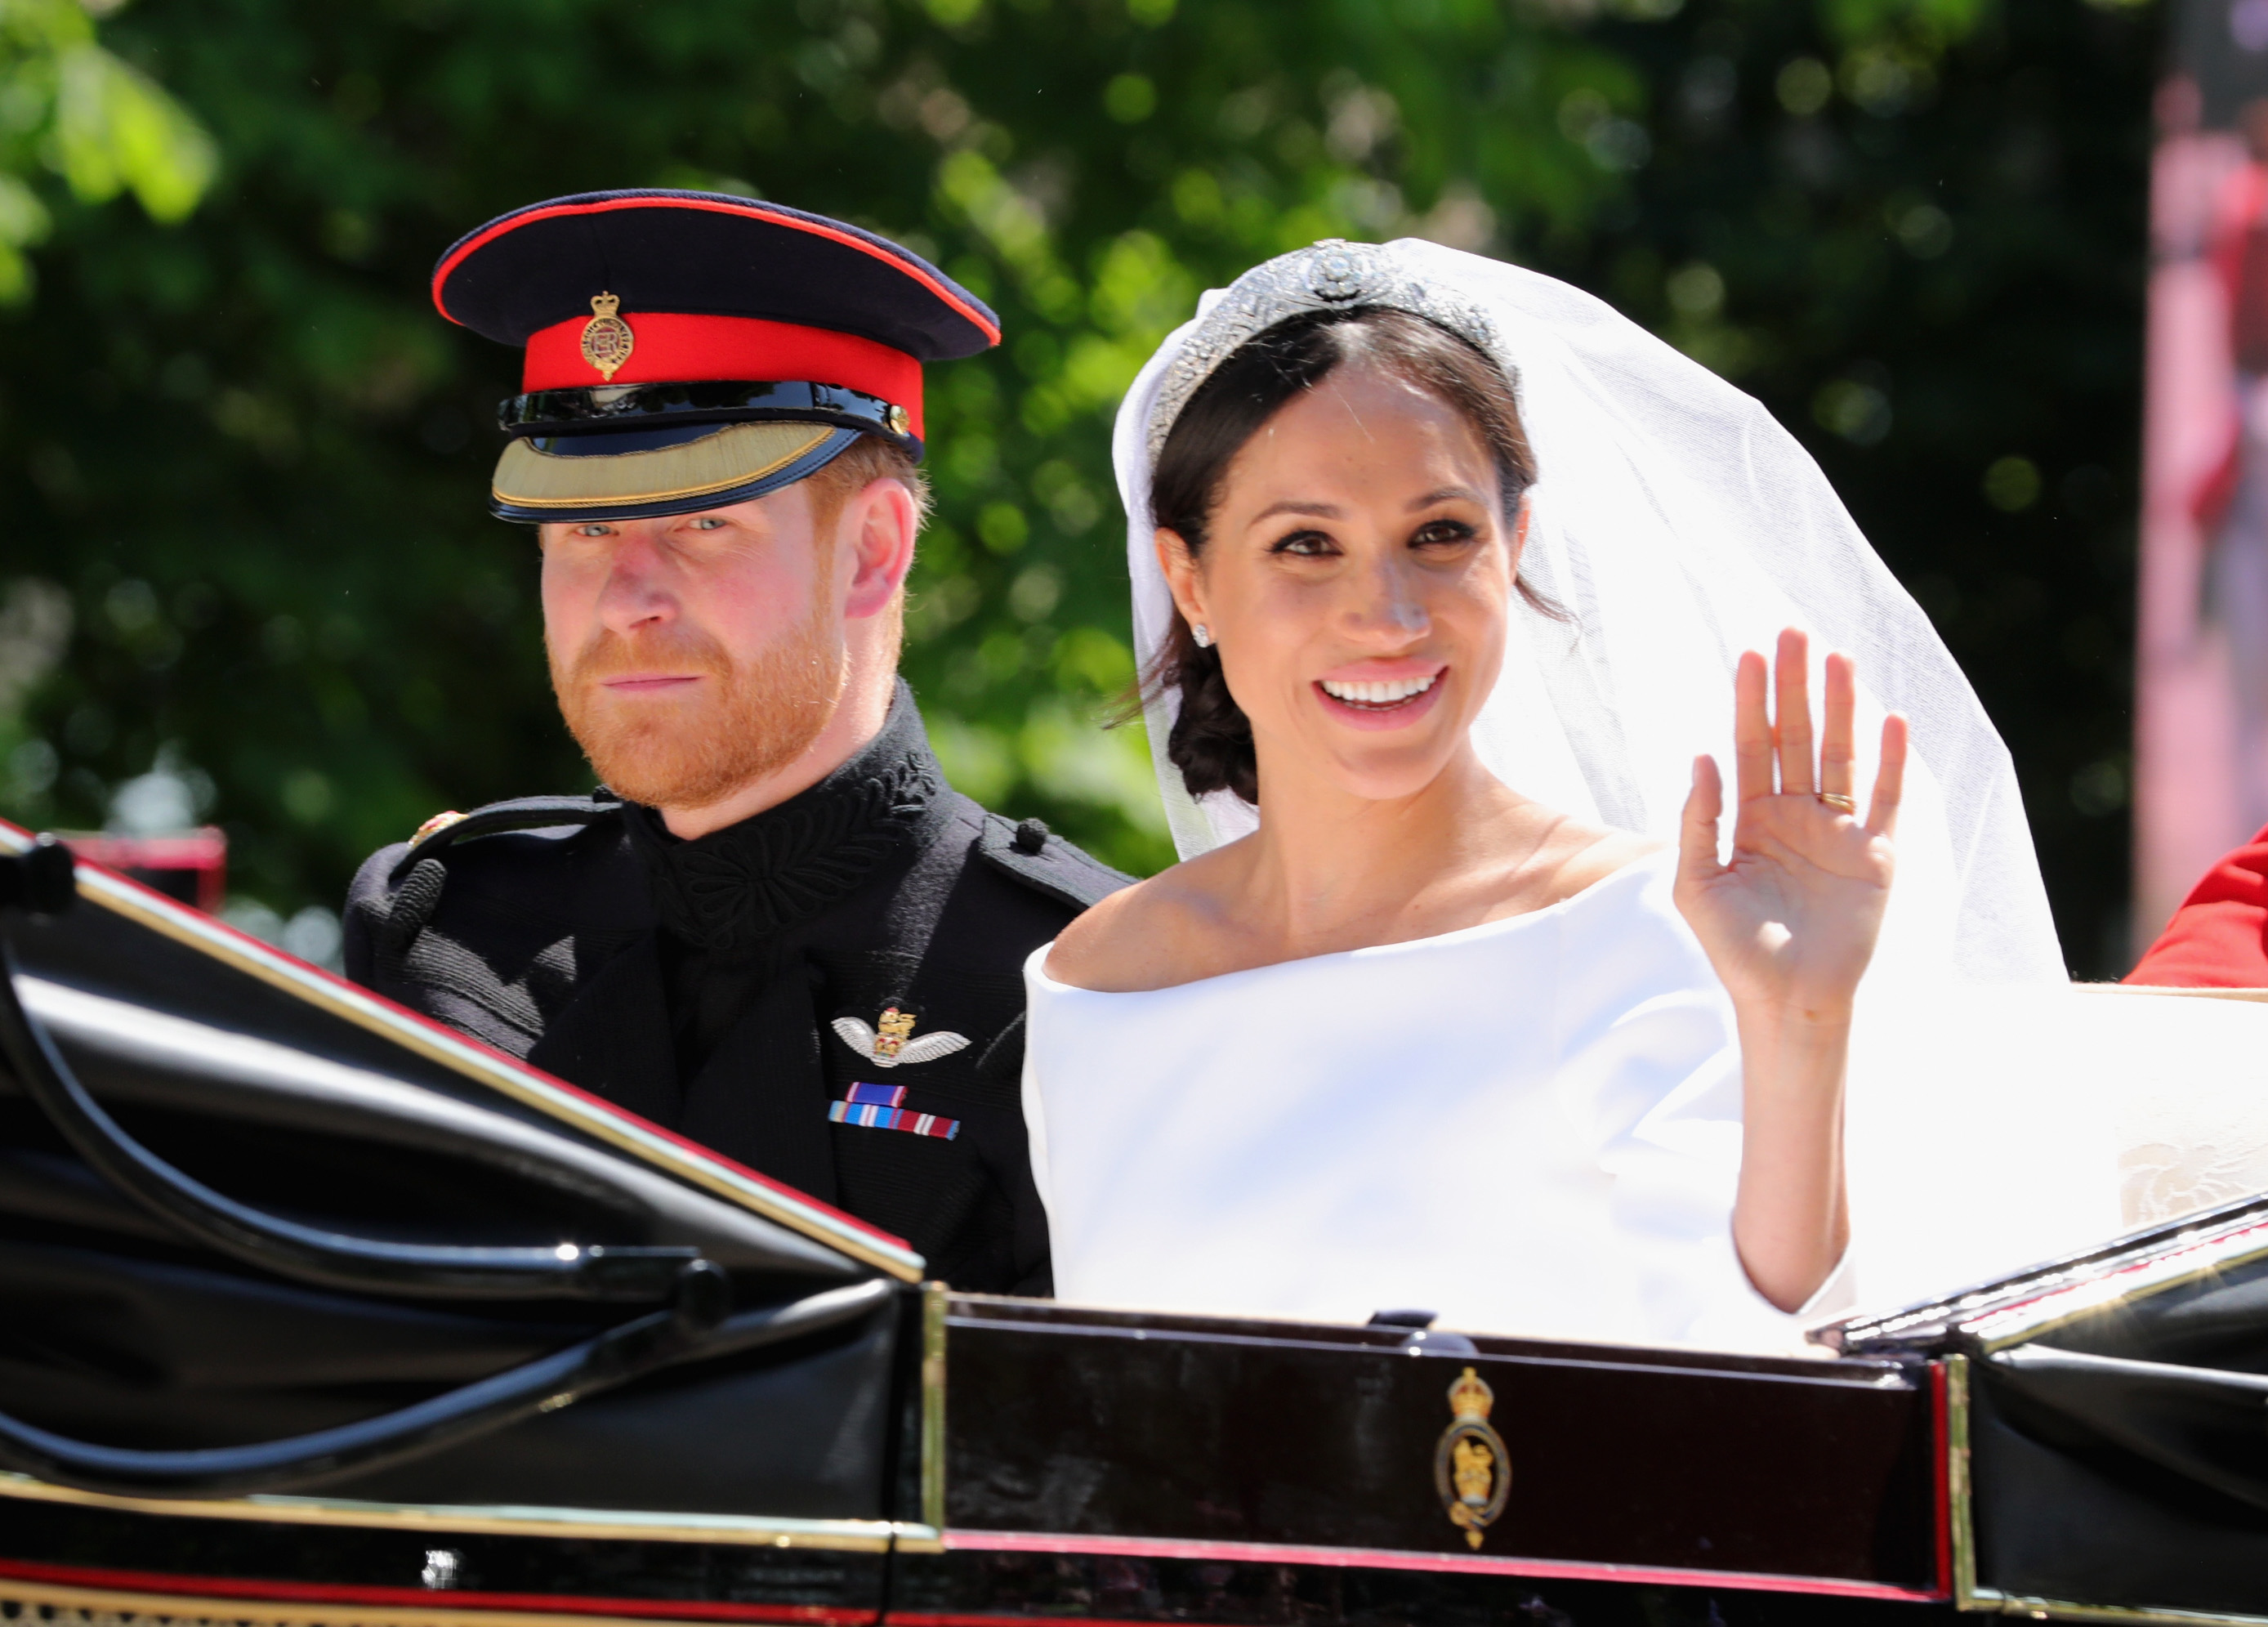 Royal wedding: How Meghan Markle's flowers may have put Princess